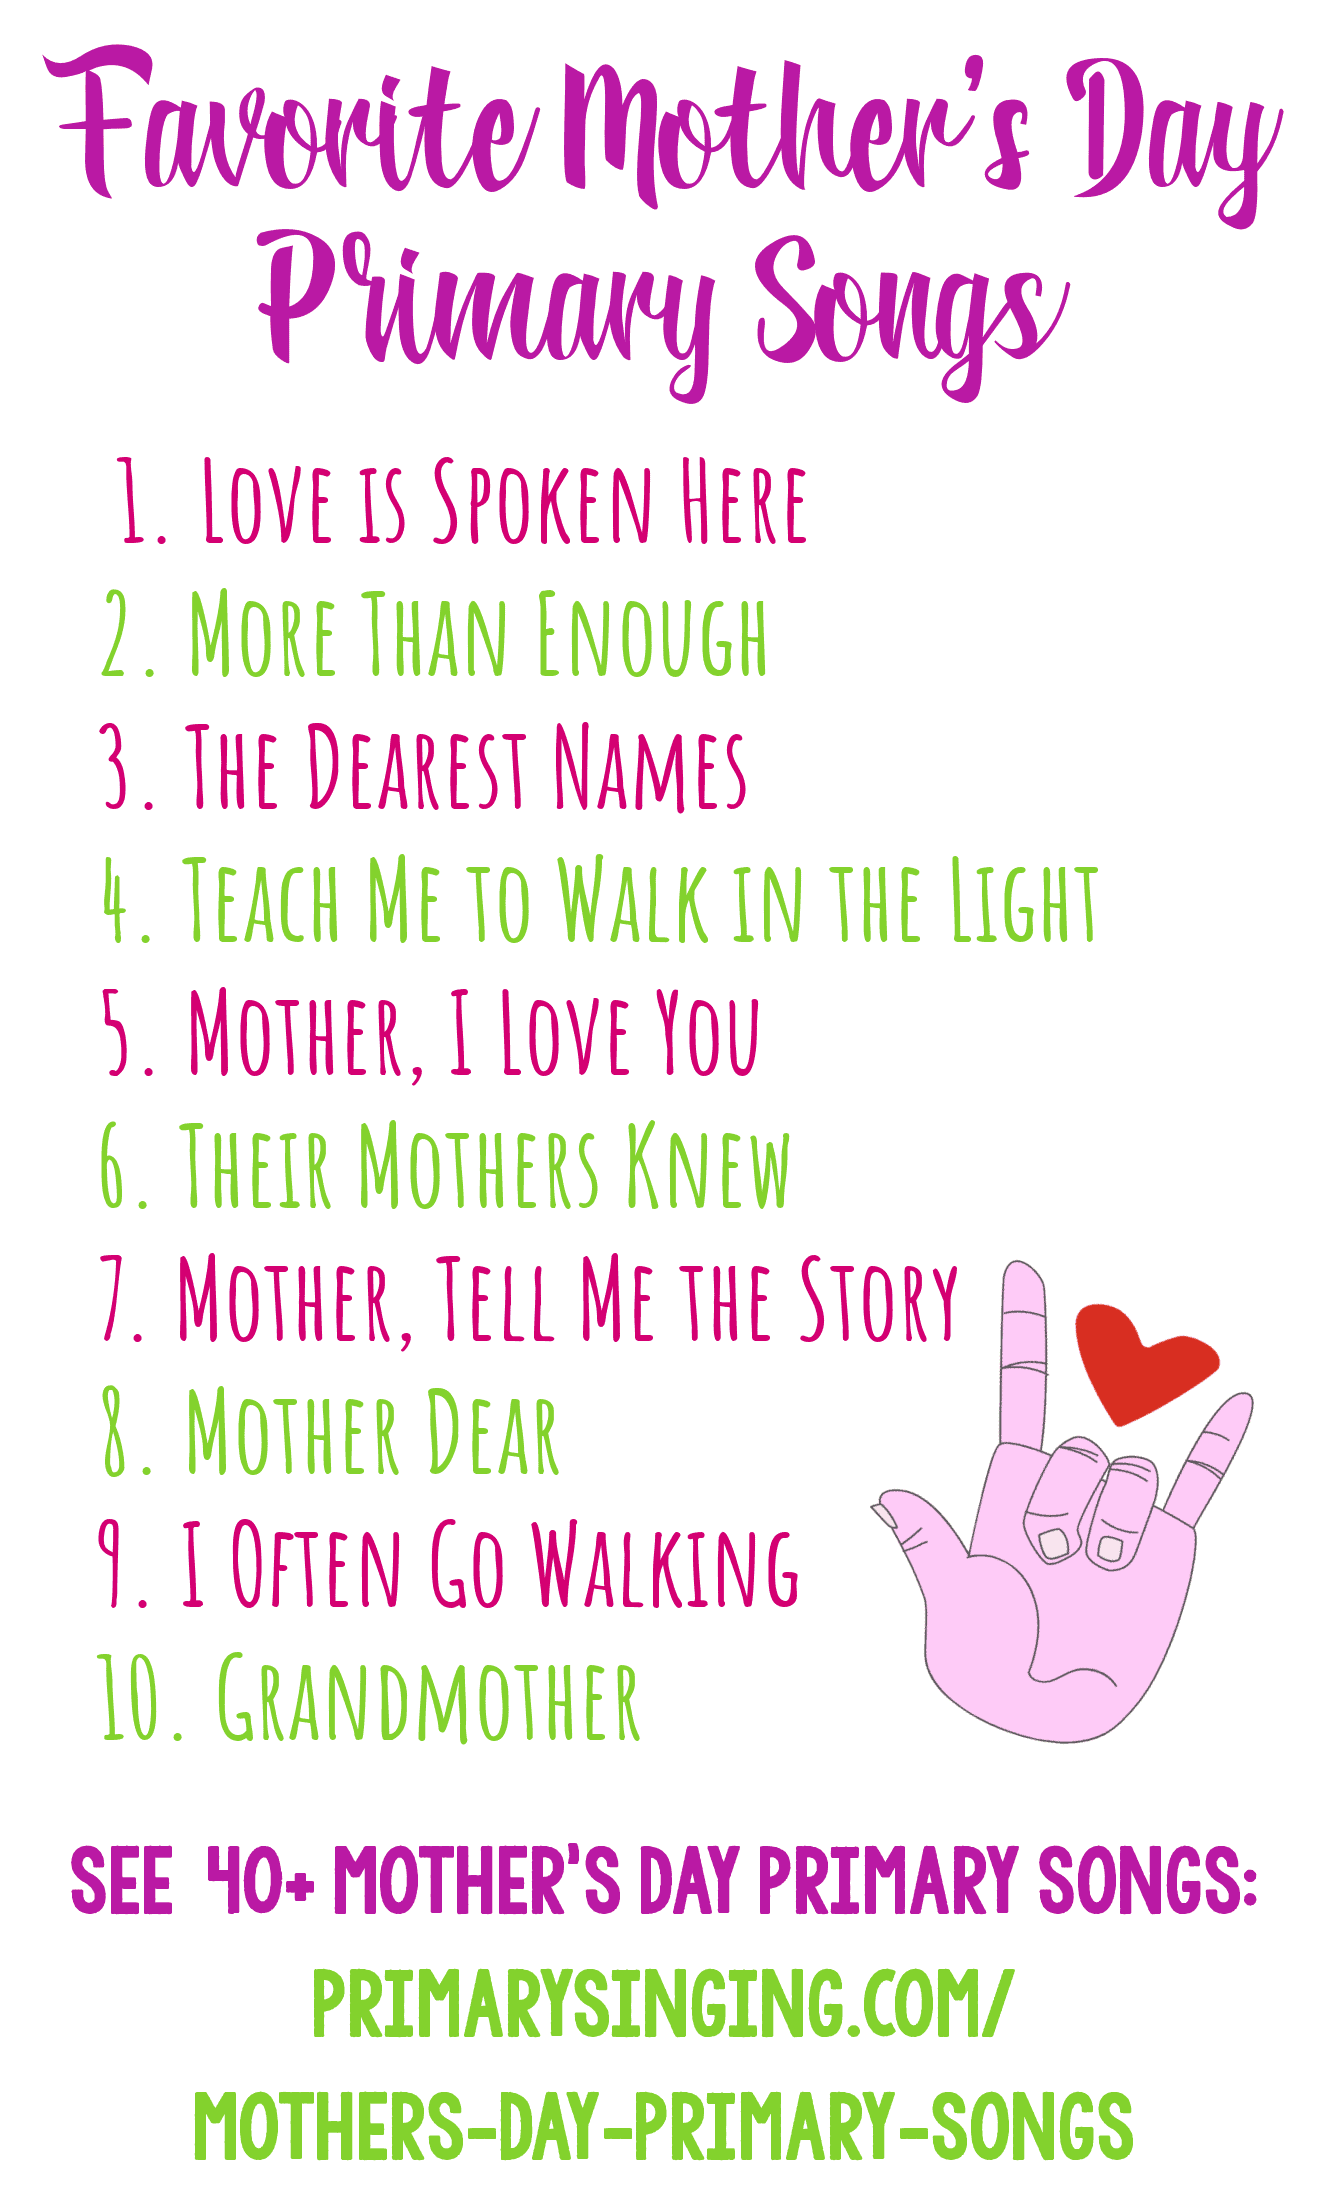 Top 10 favorite LDS Primary Songs for Mother's Day list, plus see the full list for even more ideas!